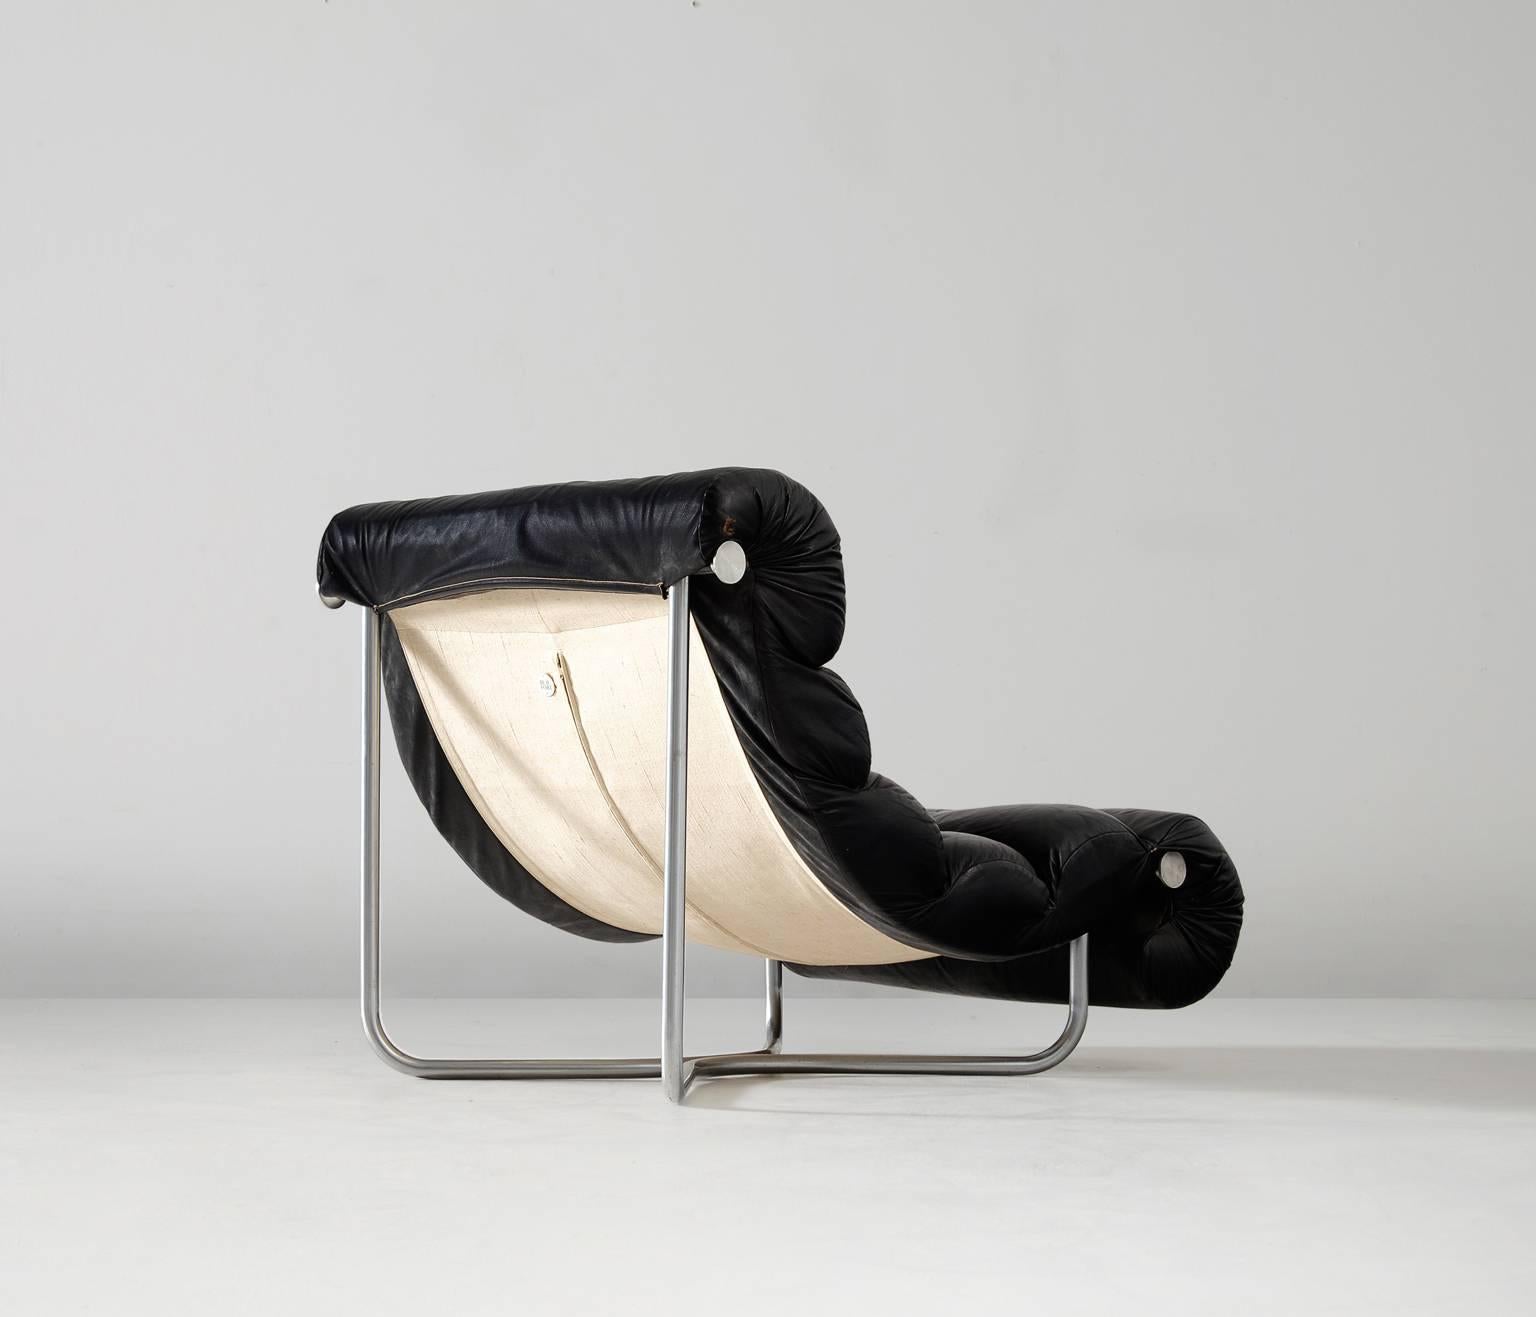 Belgian Georges Van Rijck Lounge Chair in Black Leather and Chrome, Belgium, 1972